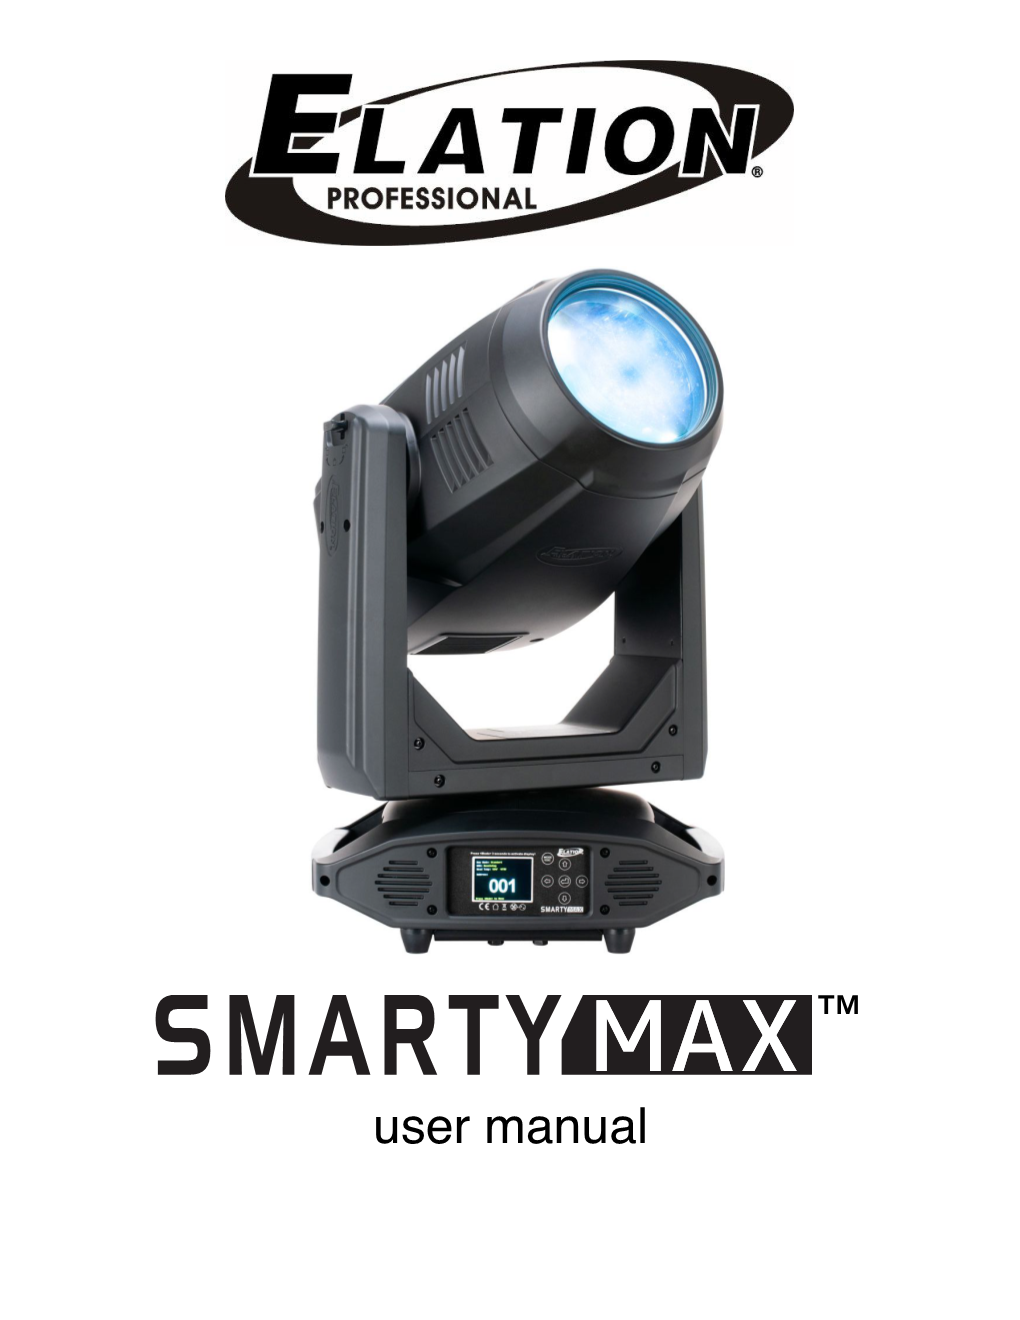 ELATION SMARTY MAX SYSTEM MENU - Supports Software Versions: ≥ 1.3.1 Features Are Subject to Change Without Notice